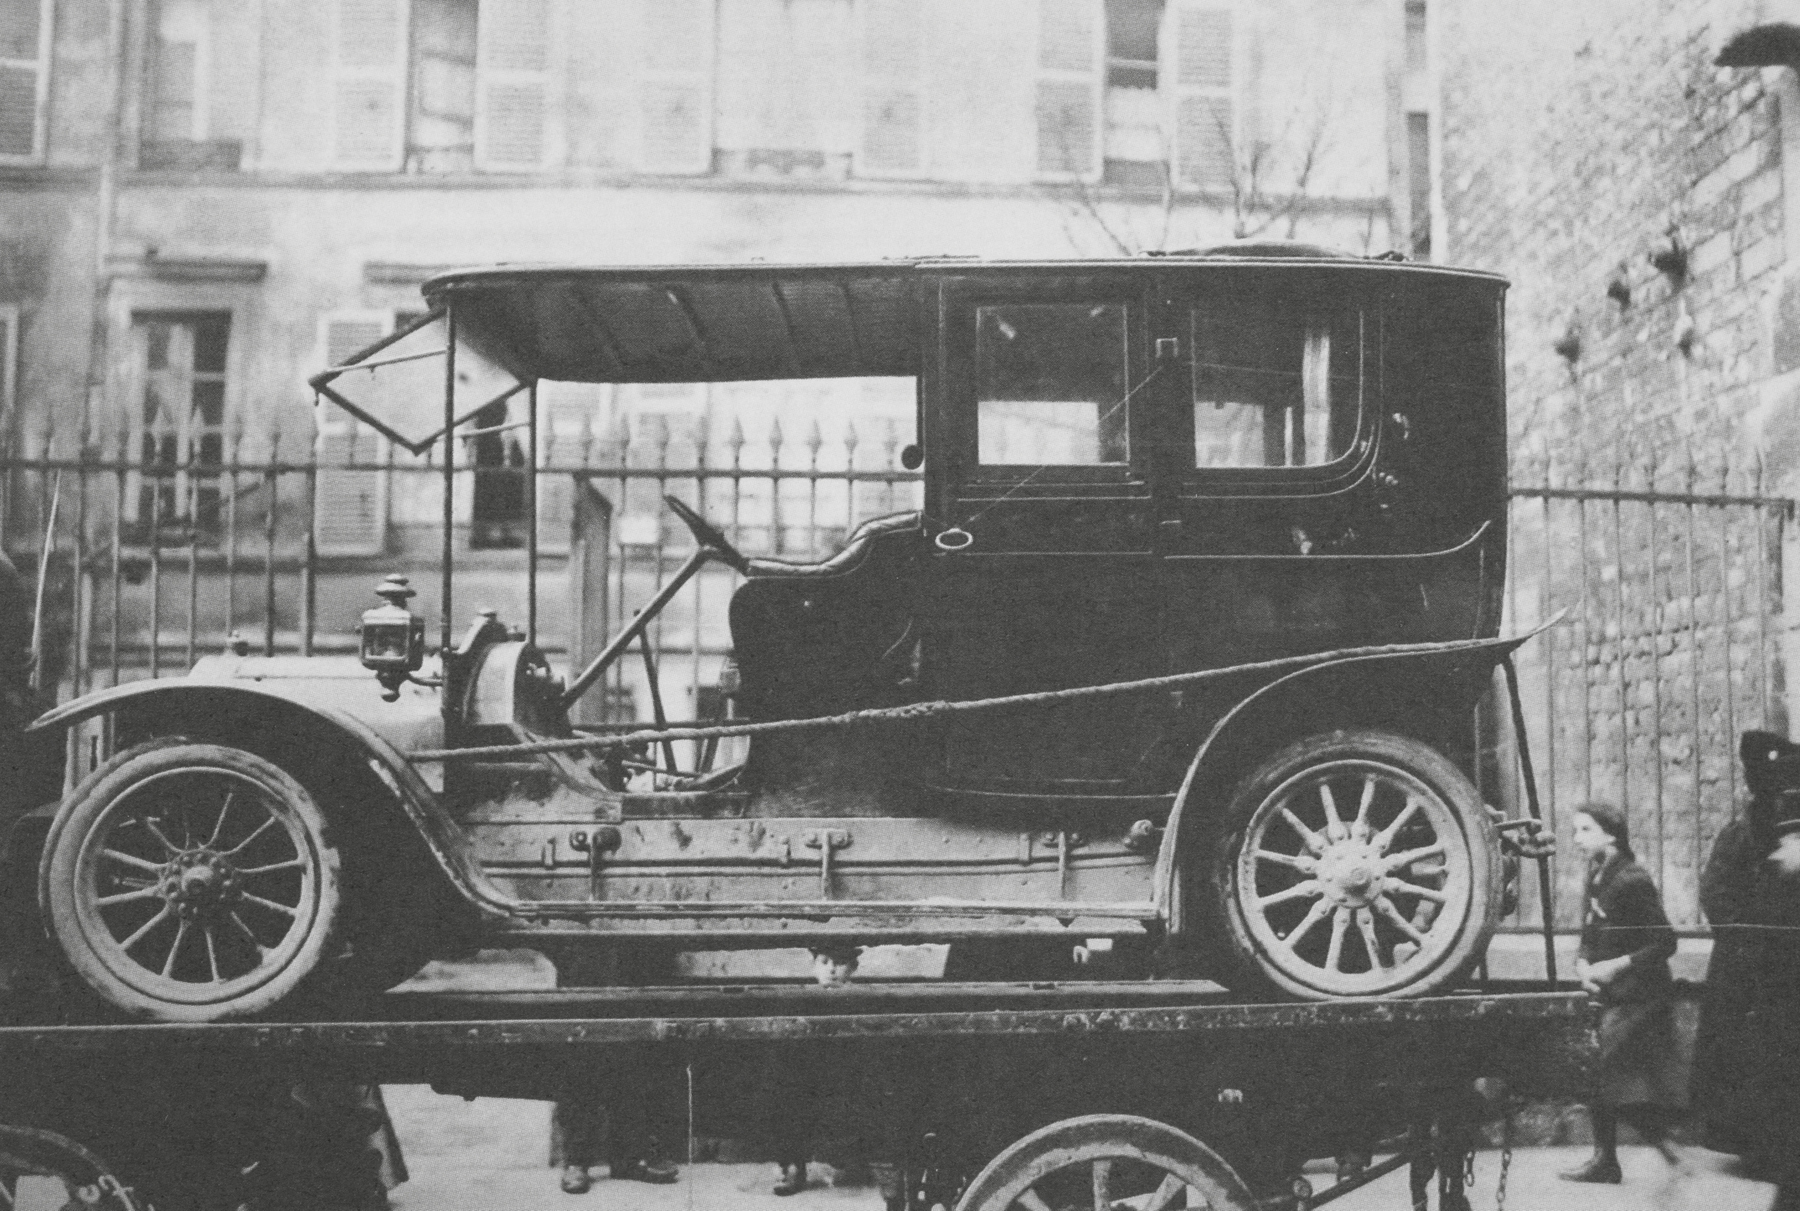 The automobile used in the robbery The holdup at the Socit Gnrale rue - photo 2